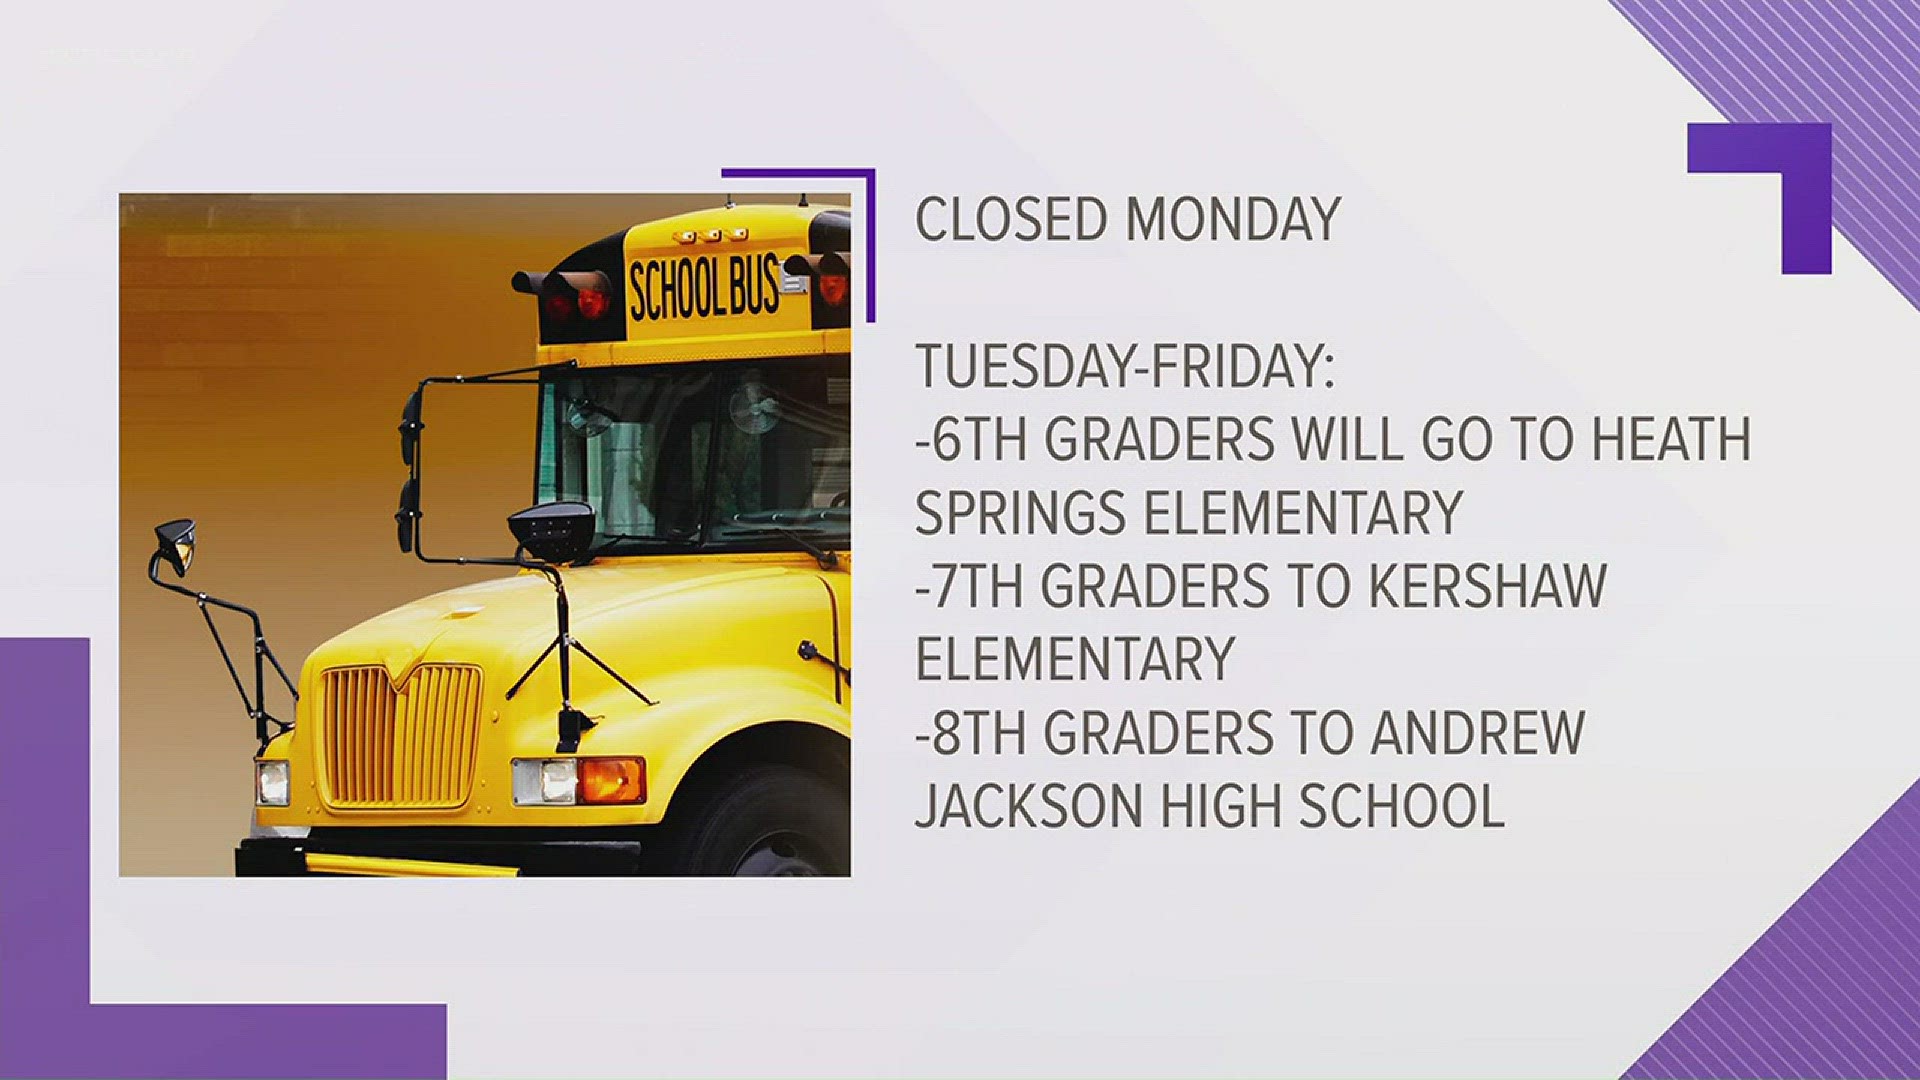 Andrew Jackson Middle School canceled classes on Monday